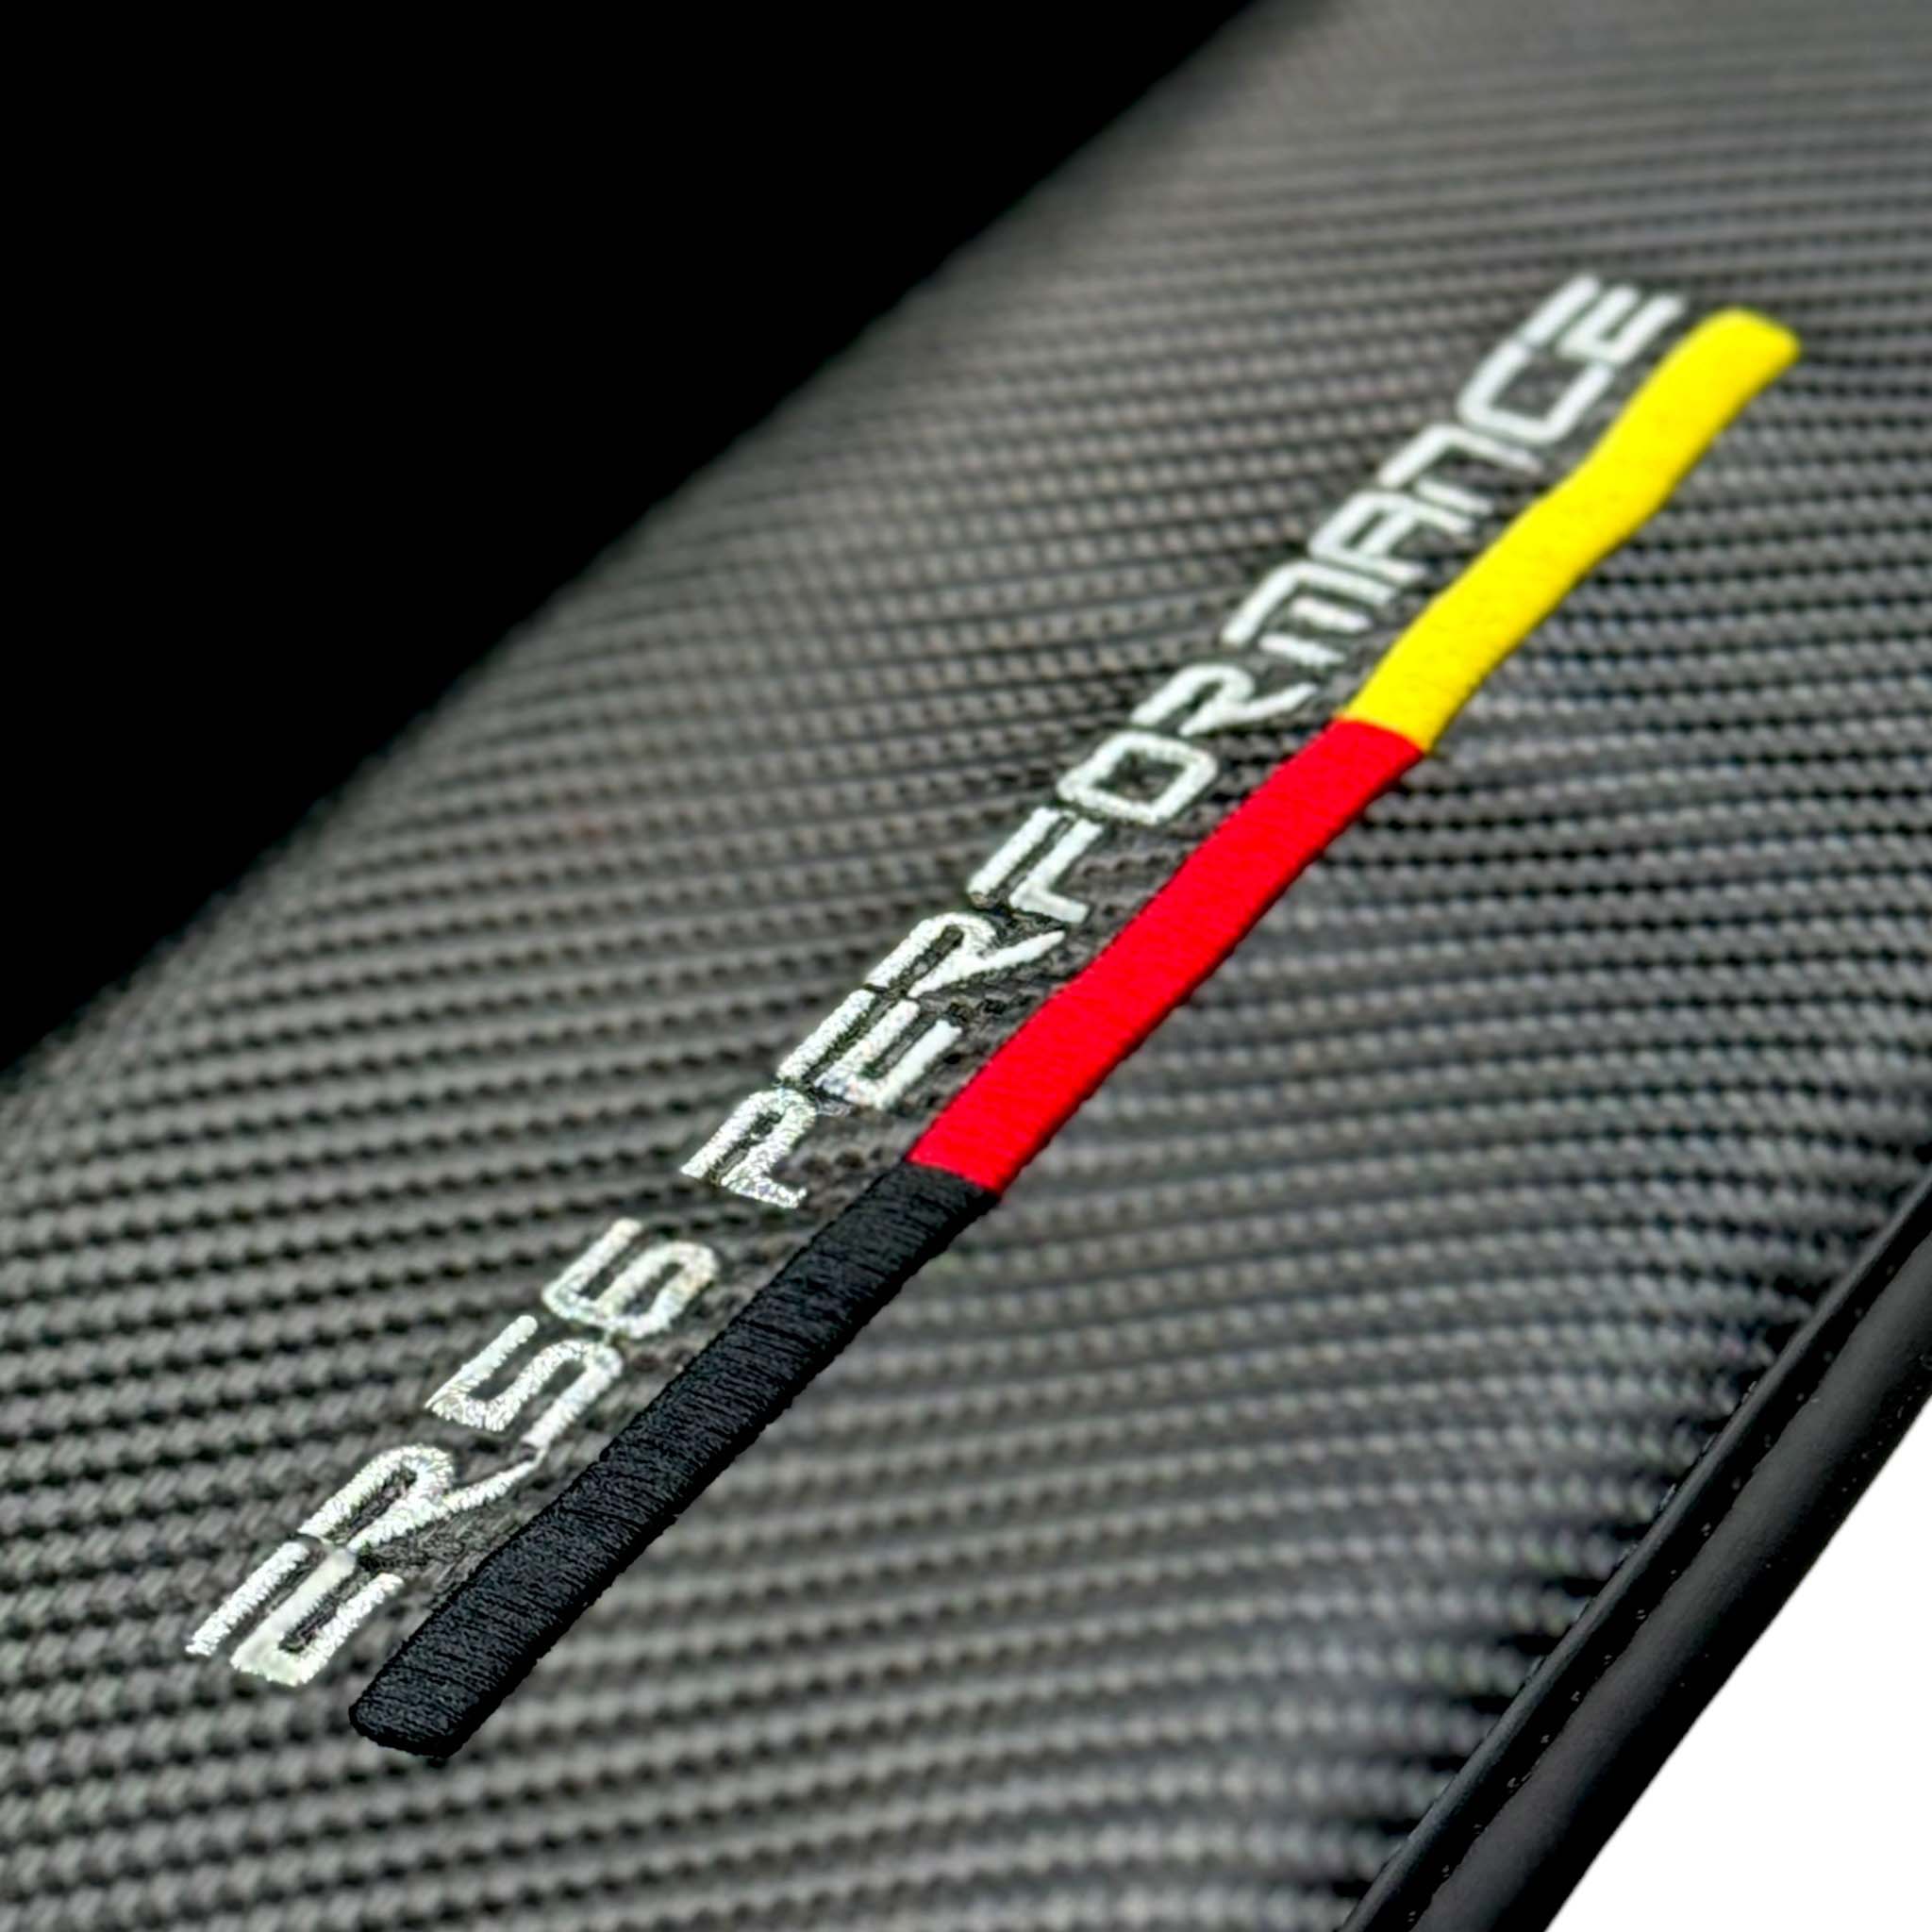 Black Floor Mats For BMW M6 F06 Gran Coupe | ER56 Performance | Carbon Edition